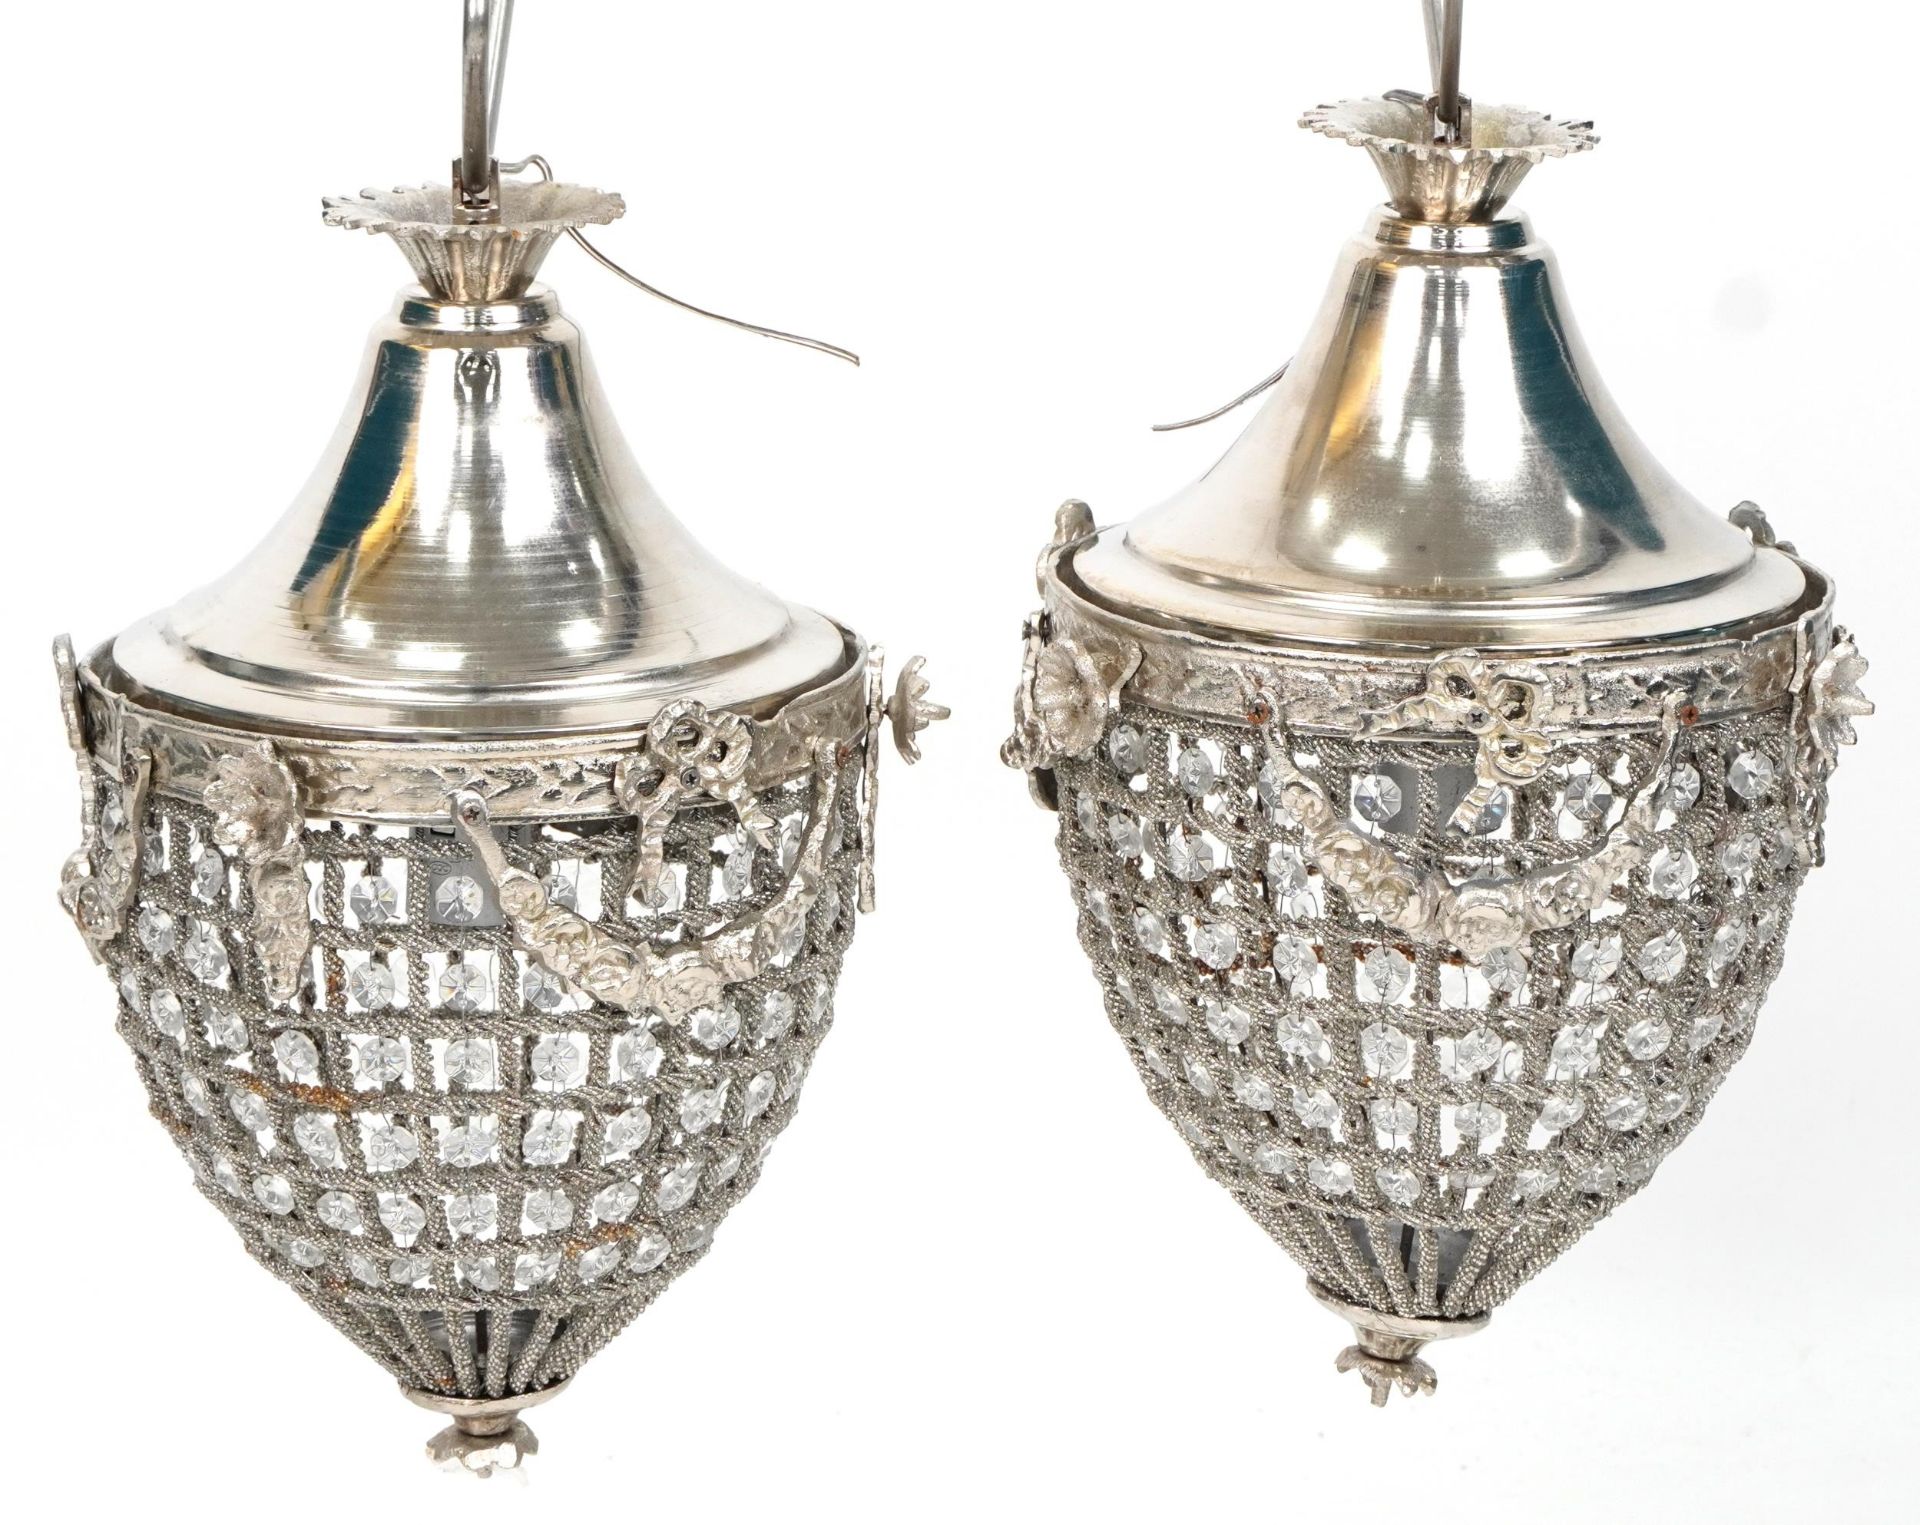 Pair of ornate silvered metal acorn chandeliers with swags and bows, 40cm high - Image 2 of 2